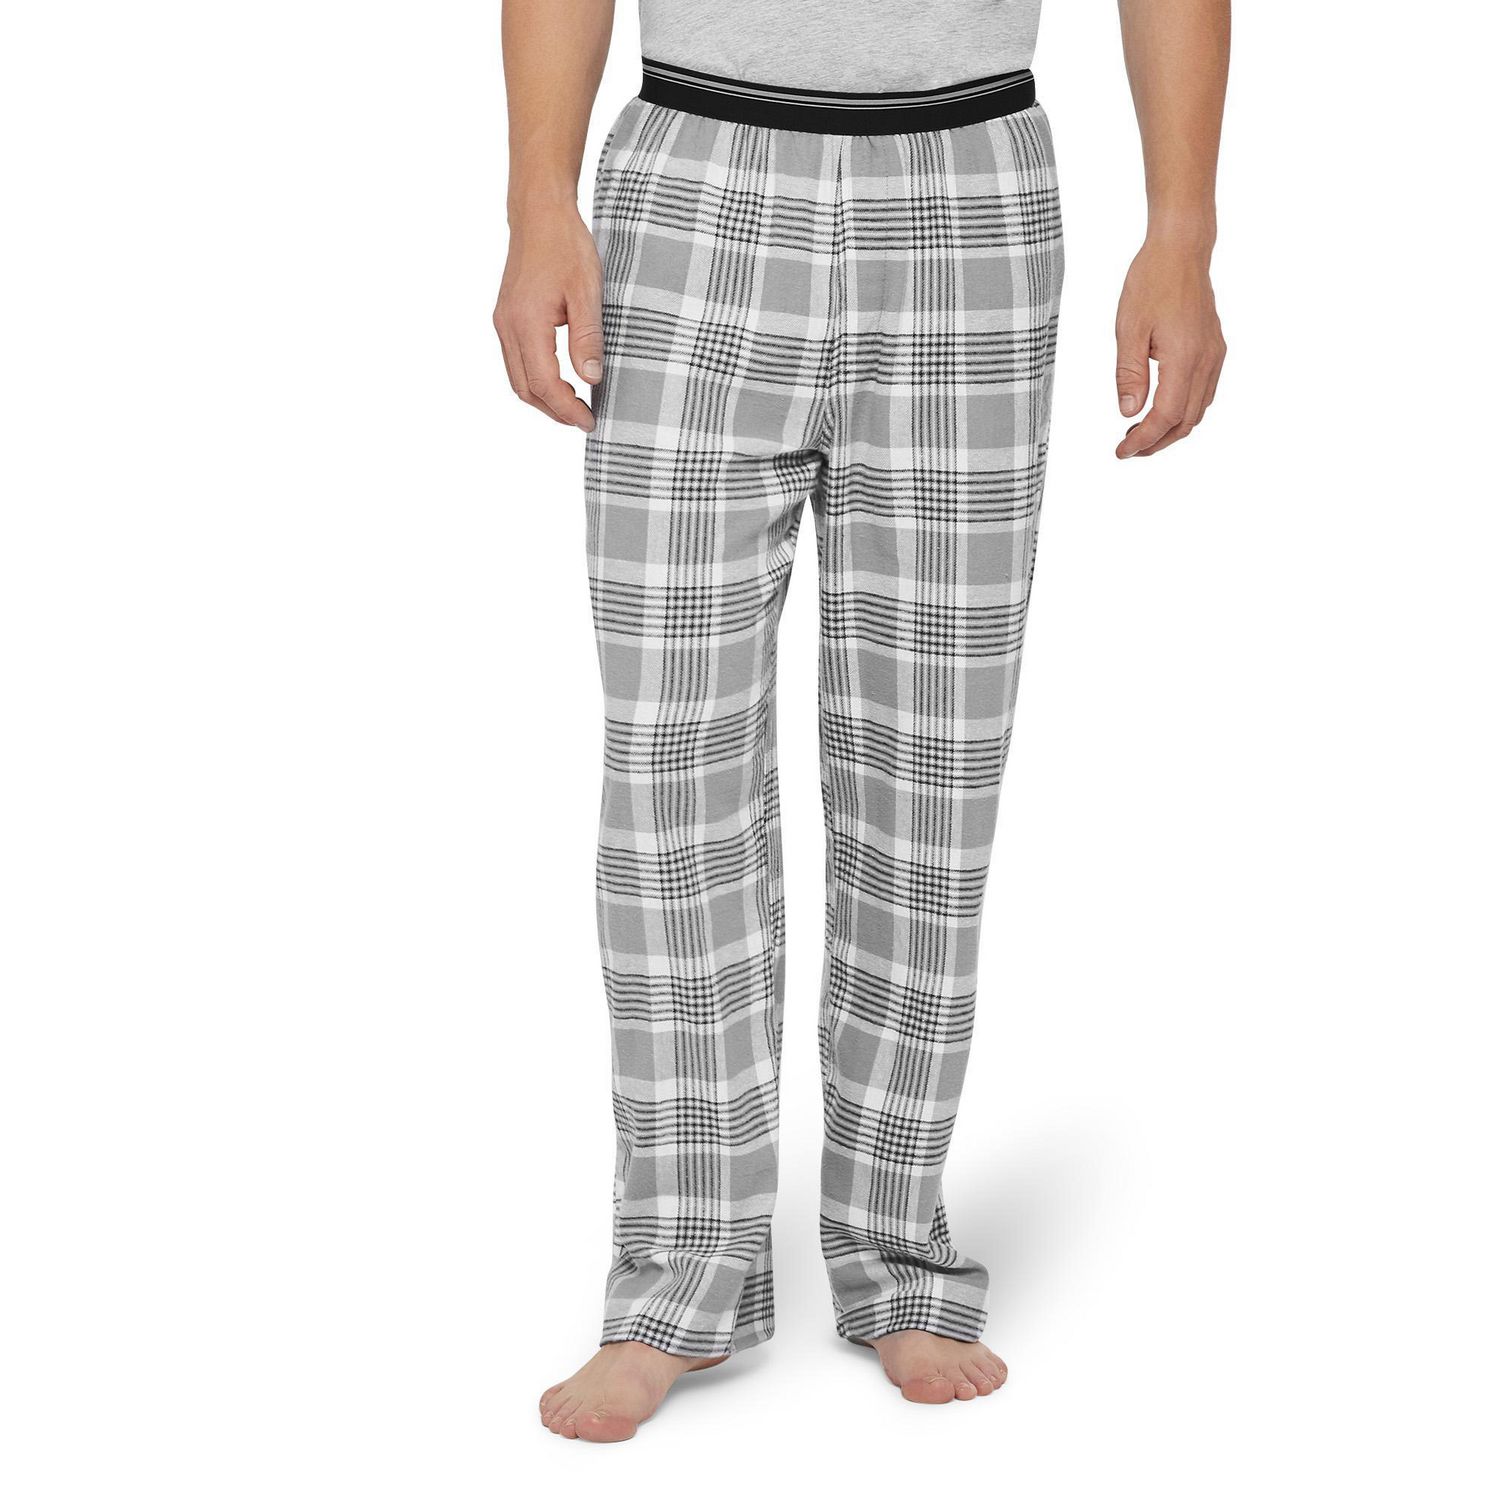 George Men's Flannel Pants with Jacquard Waistband | Walmart Canada